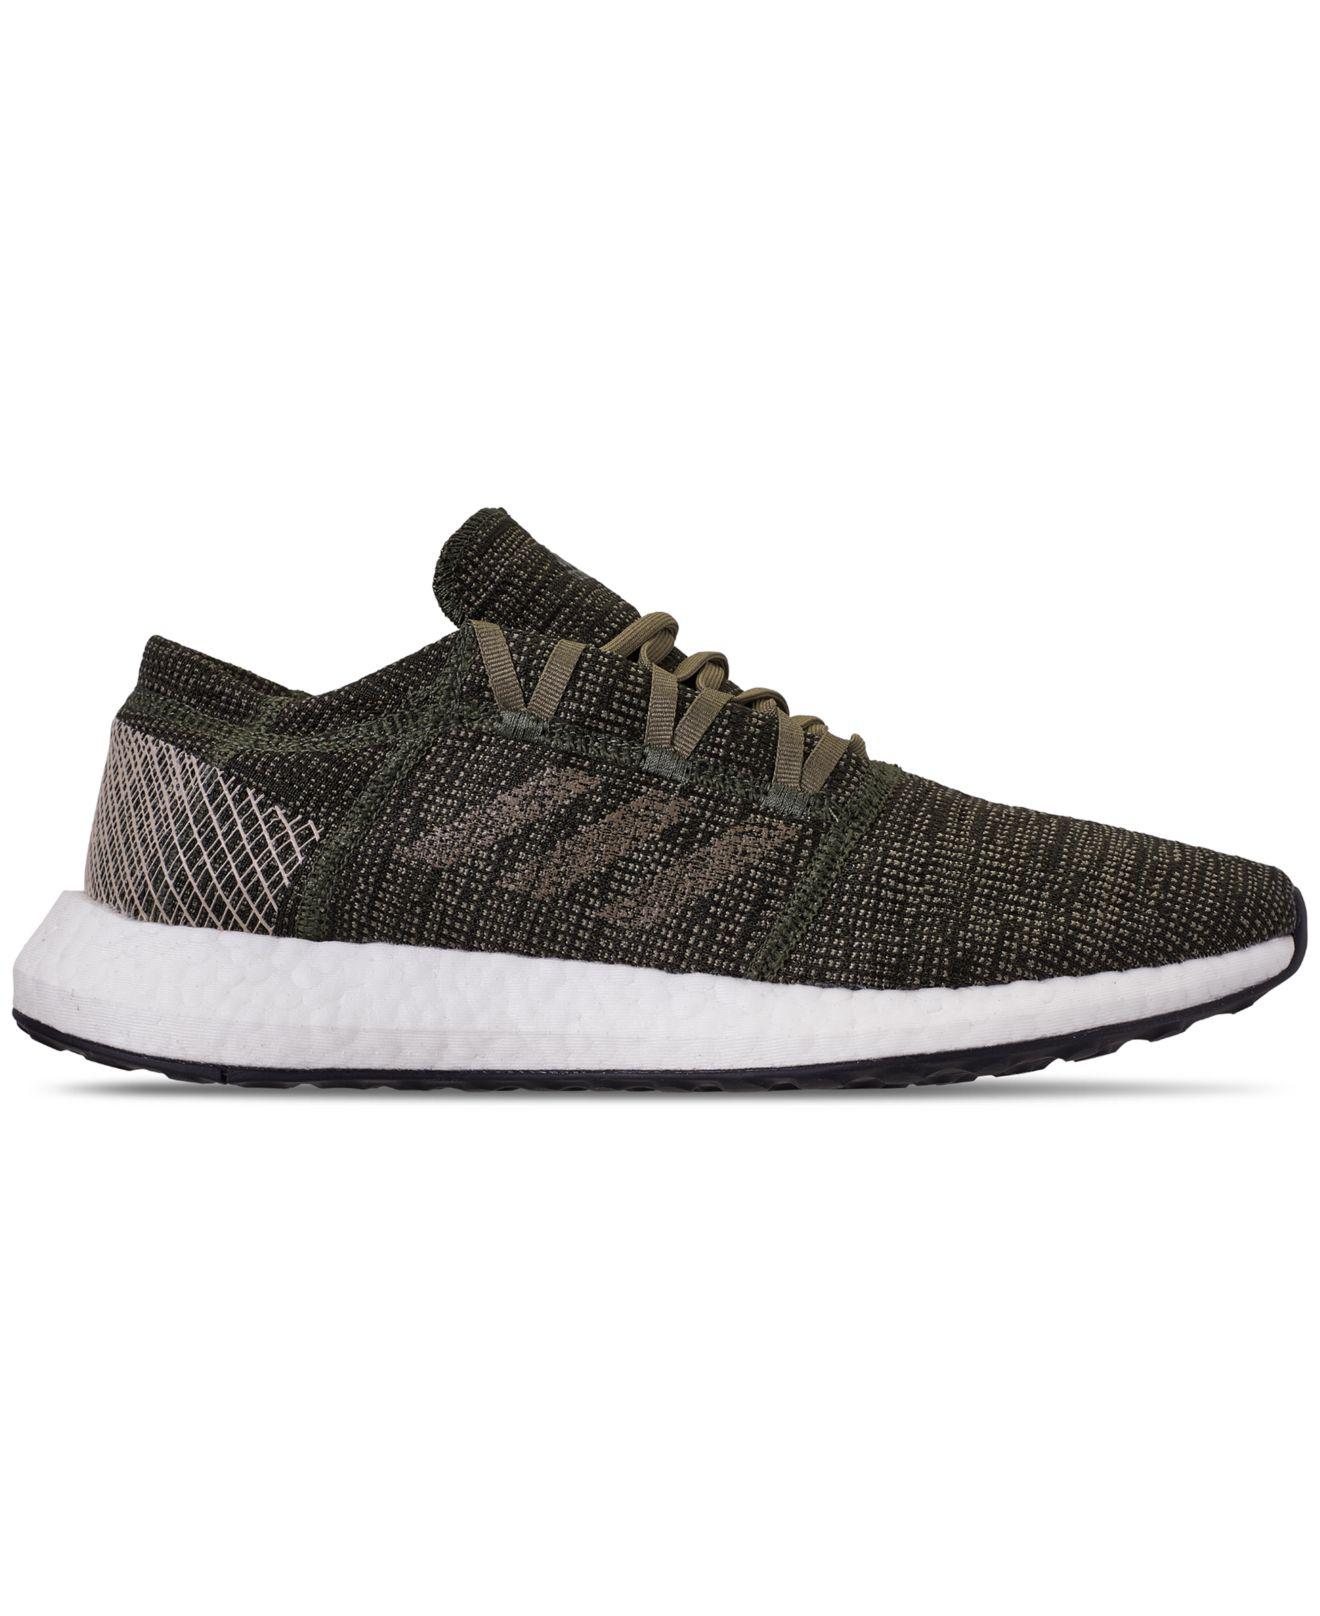 men's pureboost go running sneakers from finish line